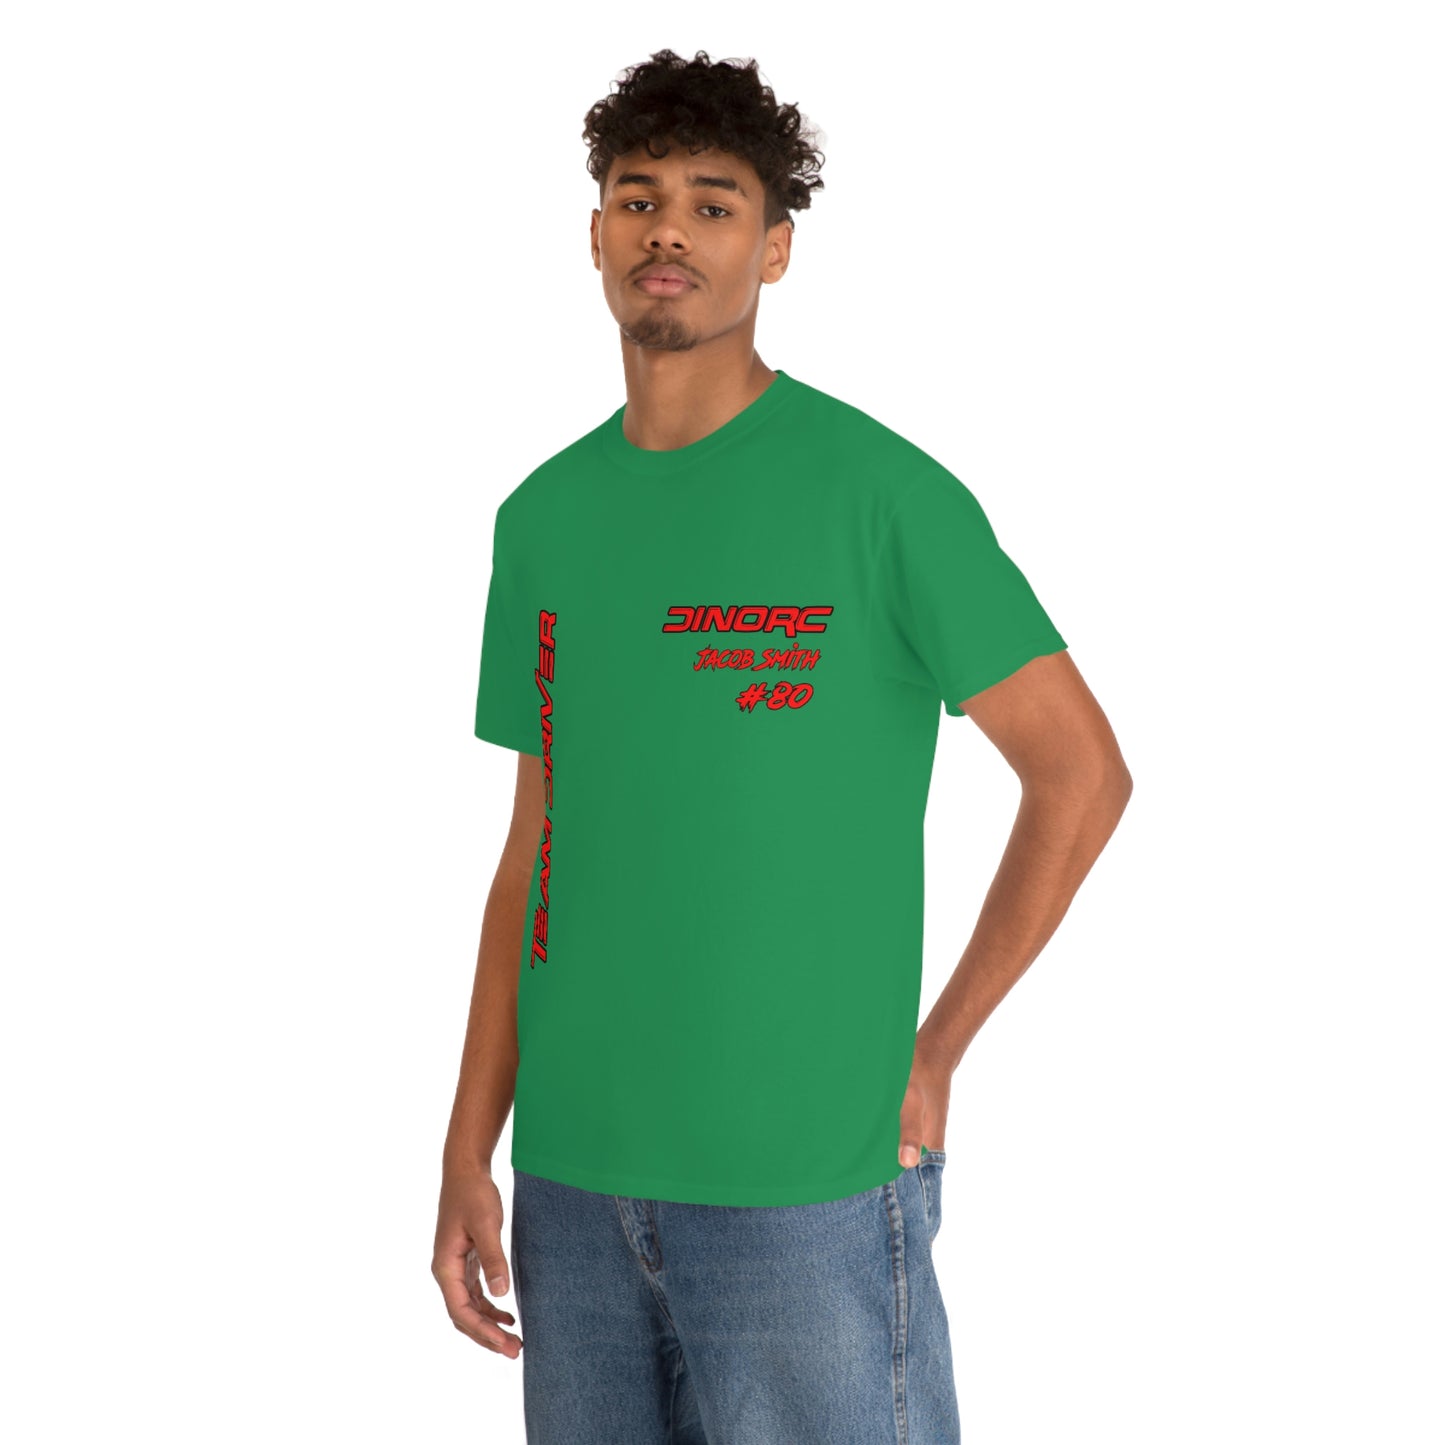 Team Driver Jacob Smith  Front and Back DinoRc Logo T-Shirt S-5x 5 colors